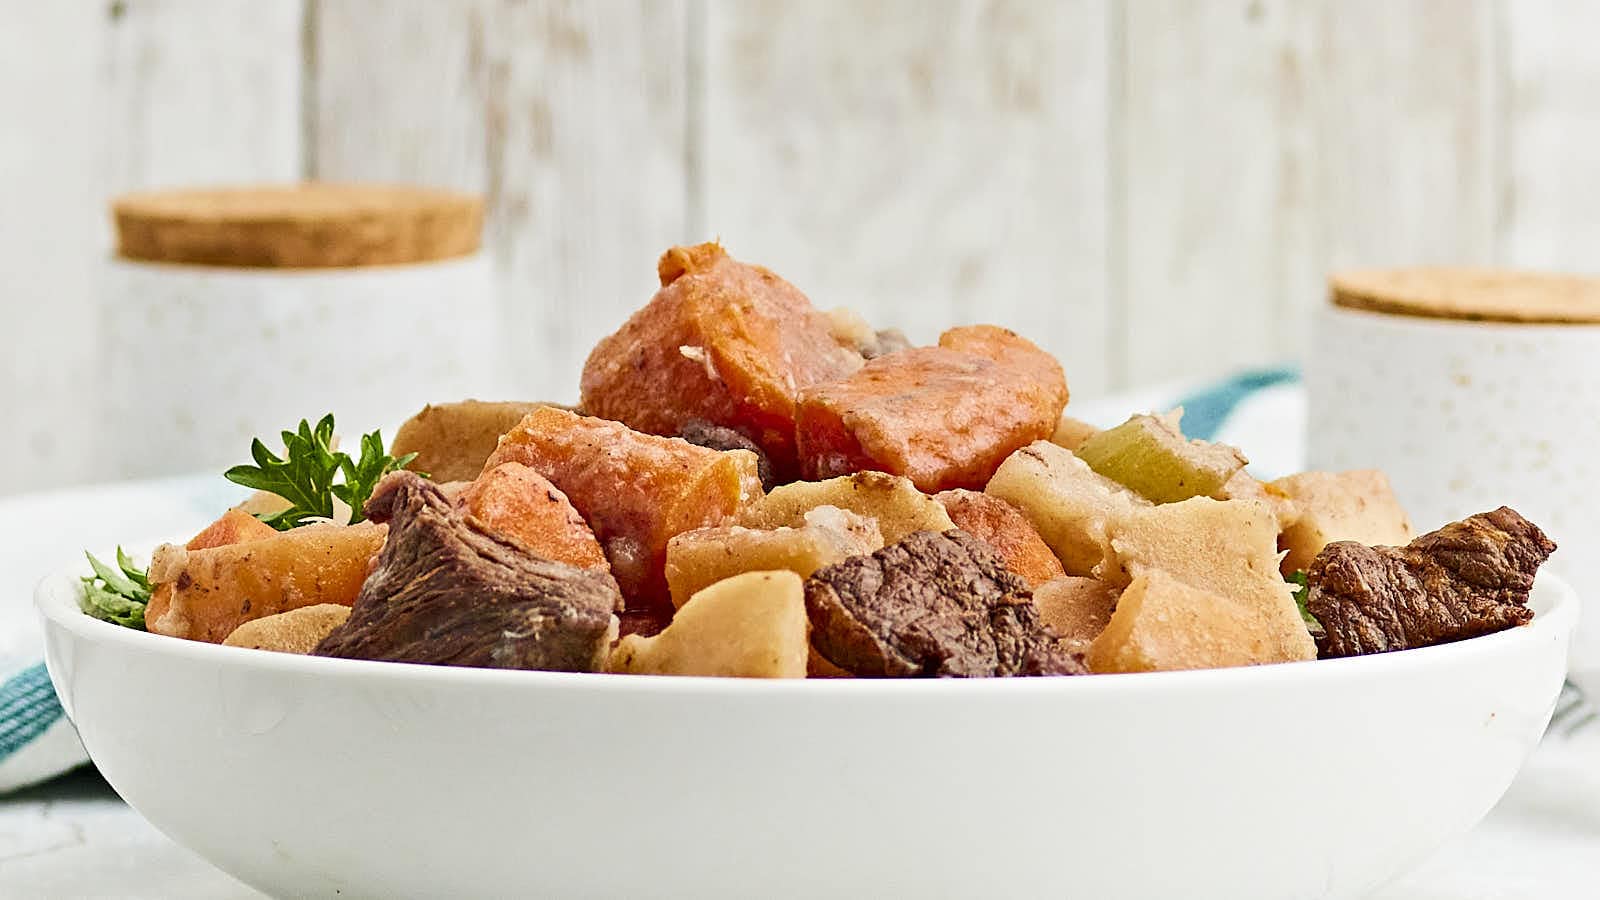 Classic Beef Stew Recipe by Cheerful Cook.